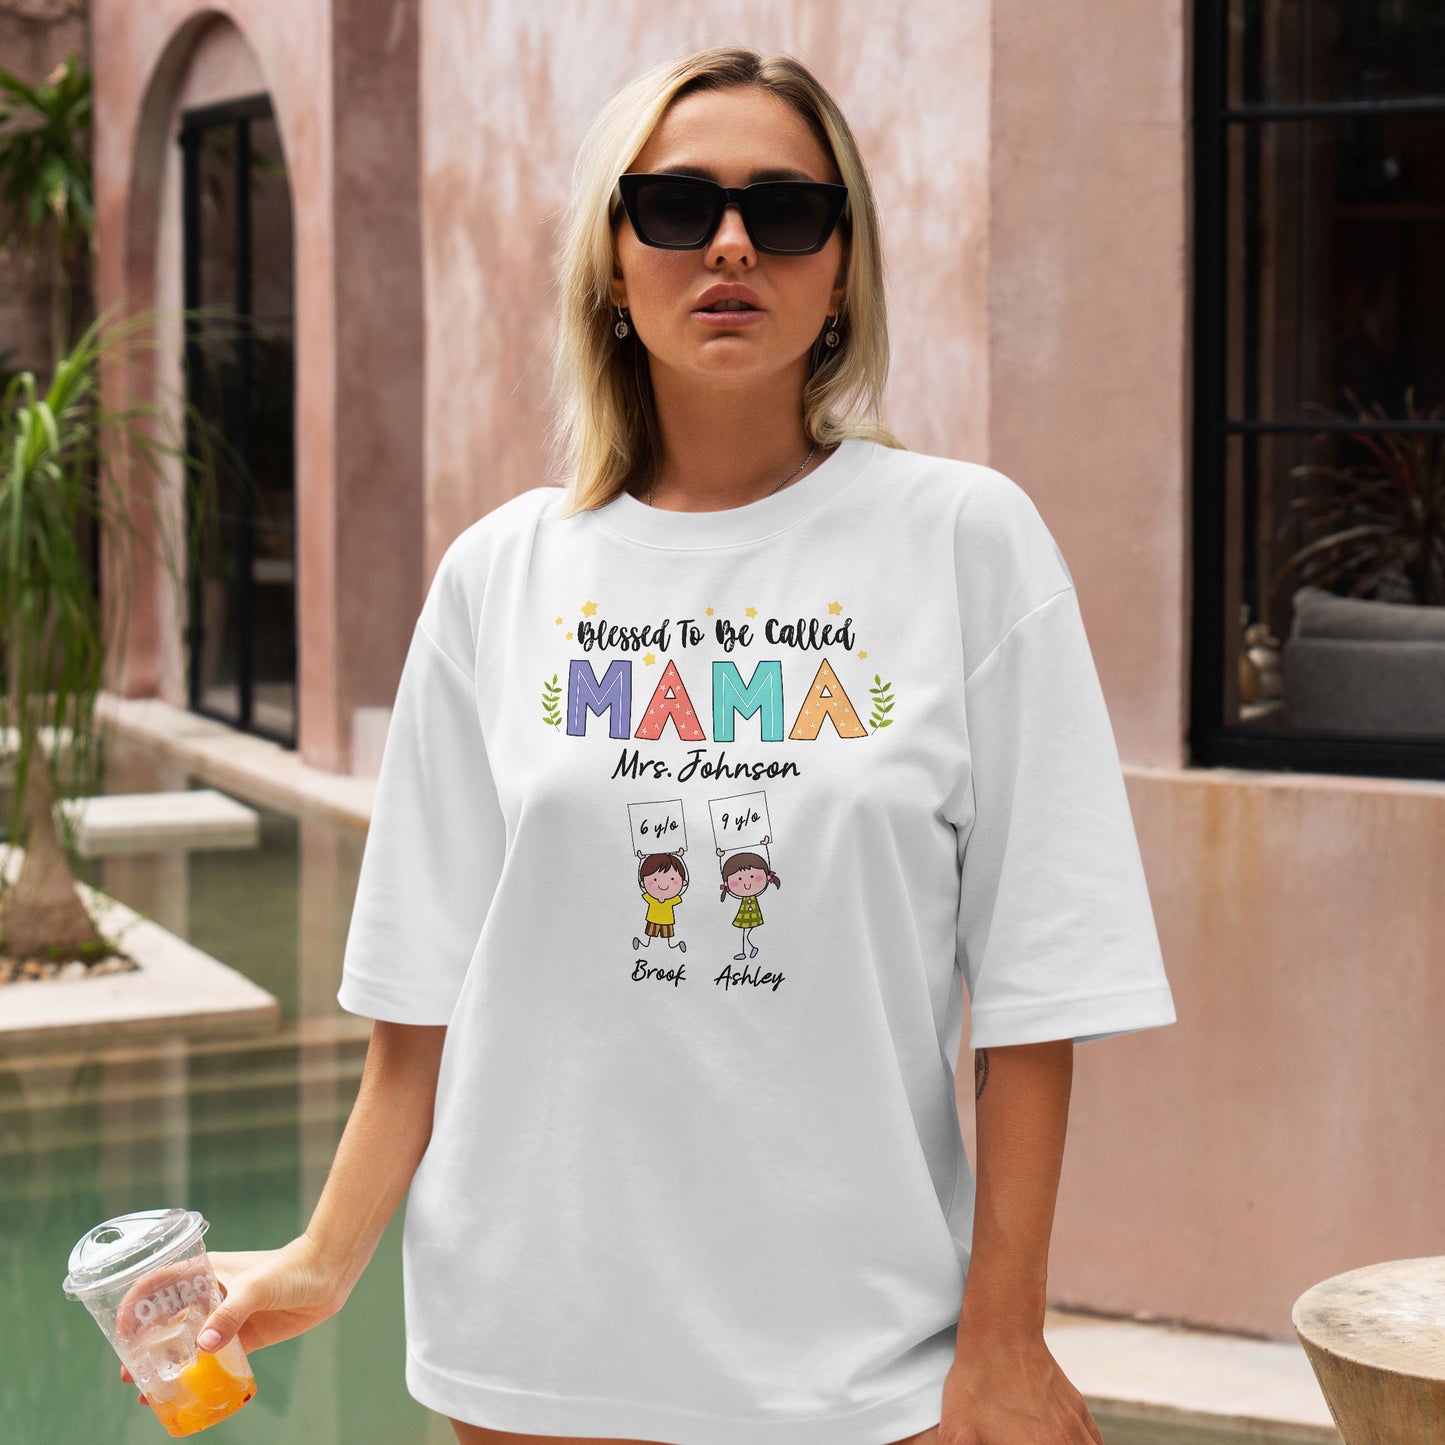 Blessed To Be Call Mama Shirt, Customized Mother's Day Shirt, Funny Kids Clipart Shirt, Personalized Kid's Name Shirt, Custom Mom Shirts For Women, Cute Mother's Day Mom Shirt, Personlized Gifts Custom Kid Shirt For Mom